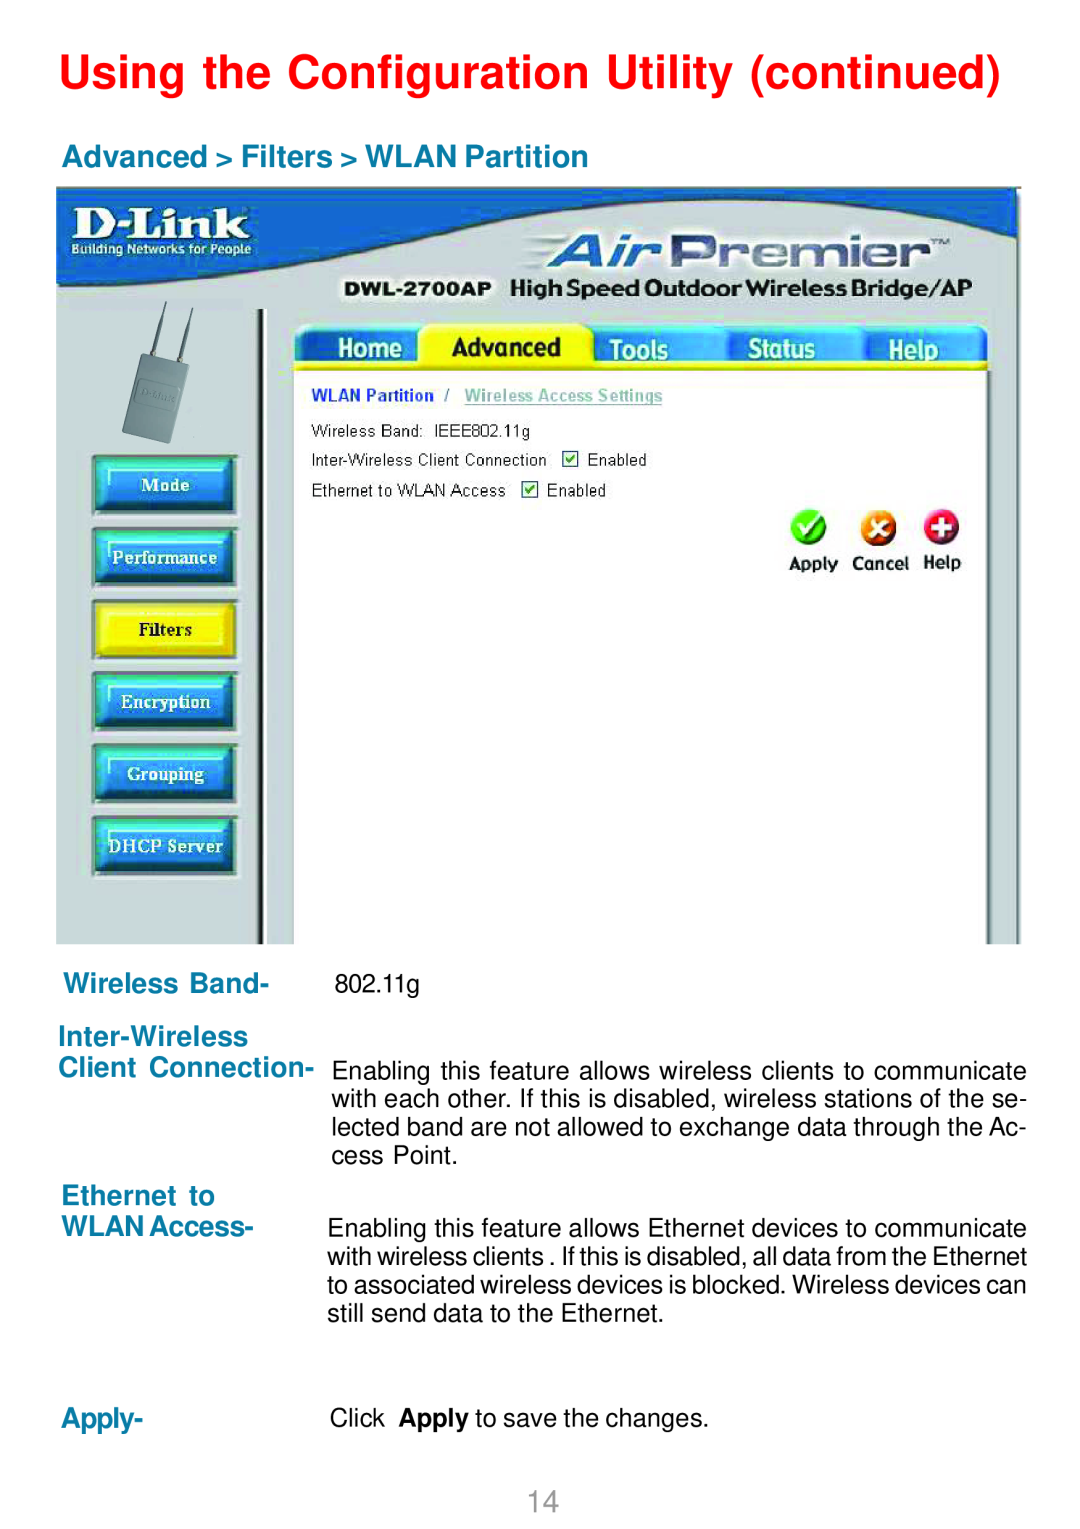 D-Link DWL-2700AP Advanced Filters WLAN Partition, Wireless Band Inter-Wireless Client Connection, Ethernet to WLAN Access 